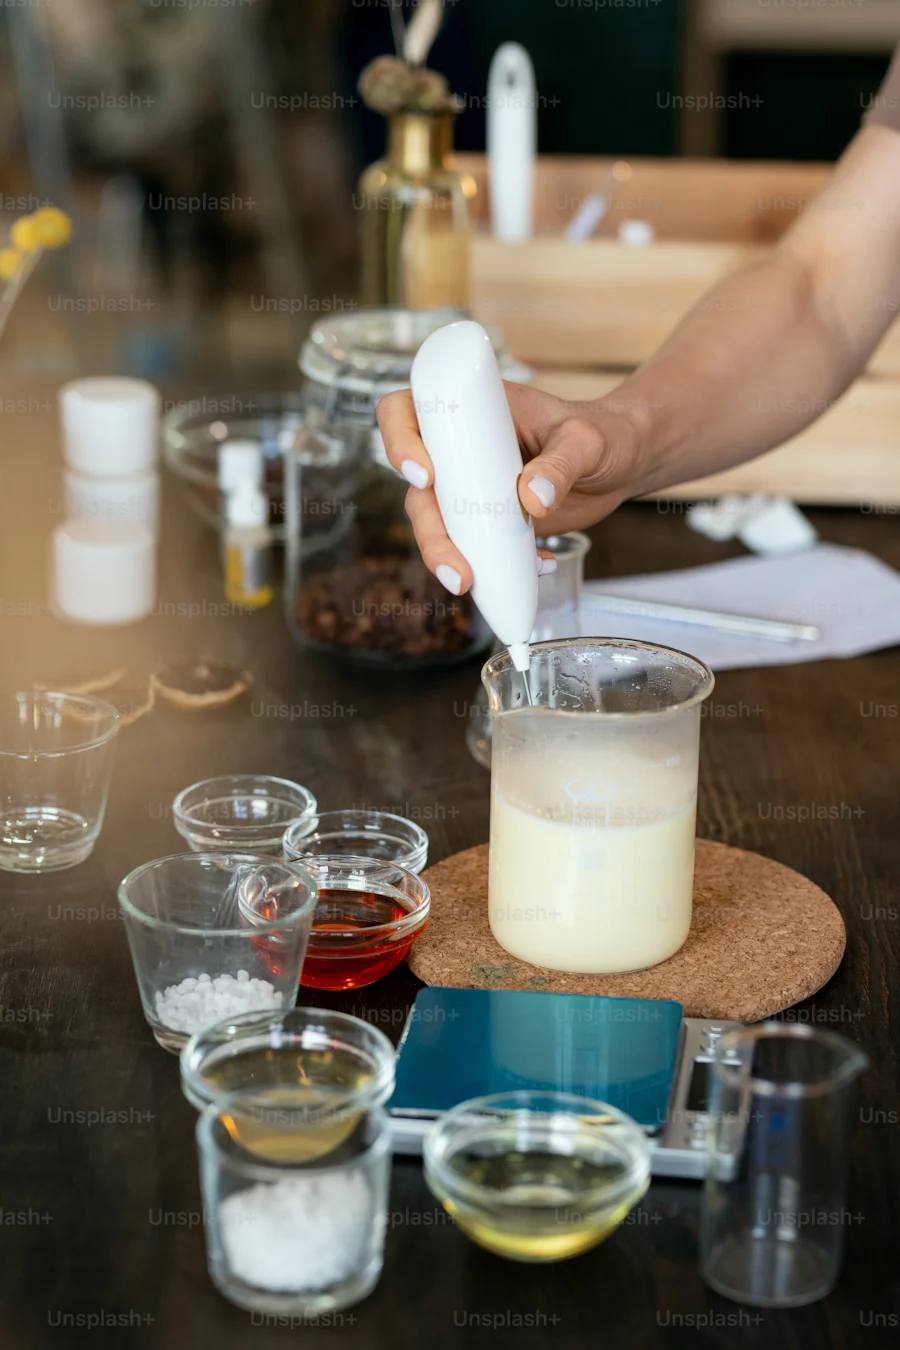 Image of the soap making process ingredients